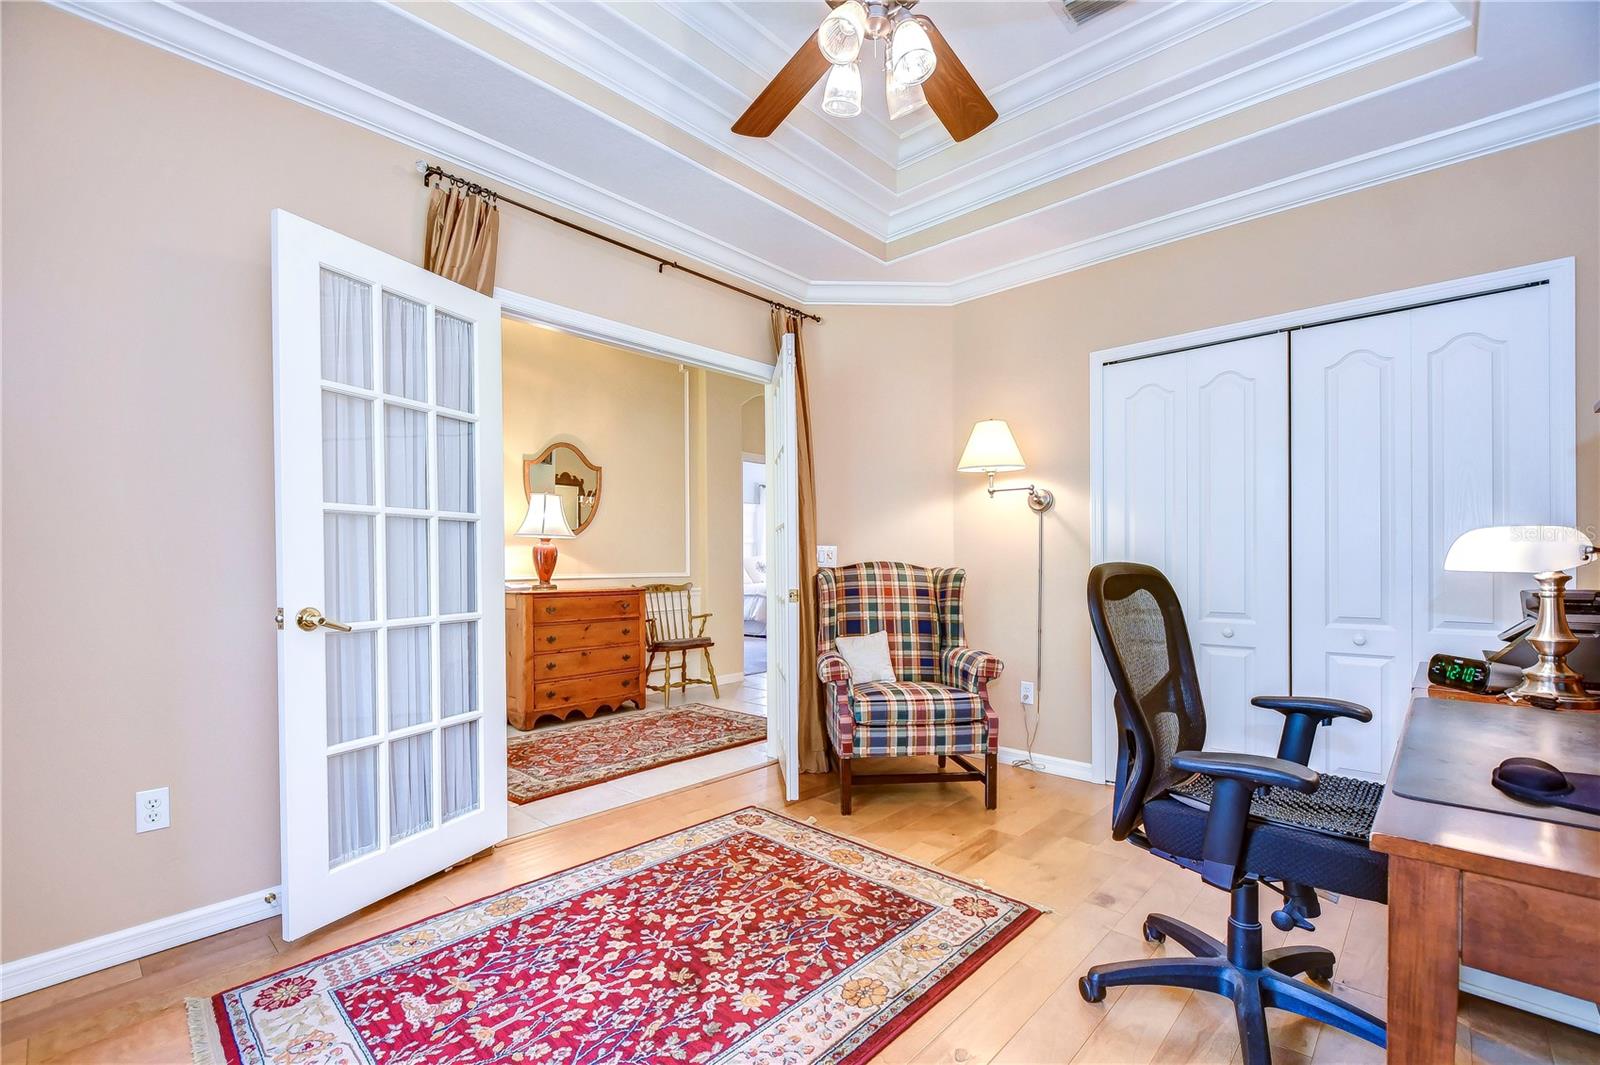 Beautiful tray ceiling and French doors!